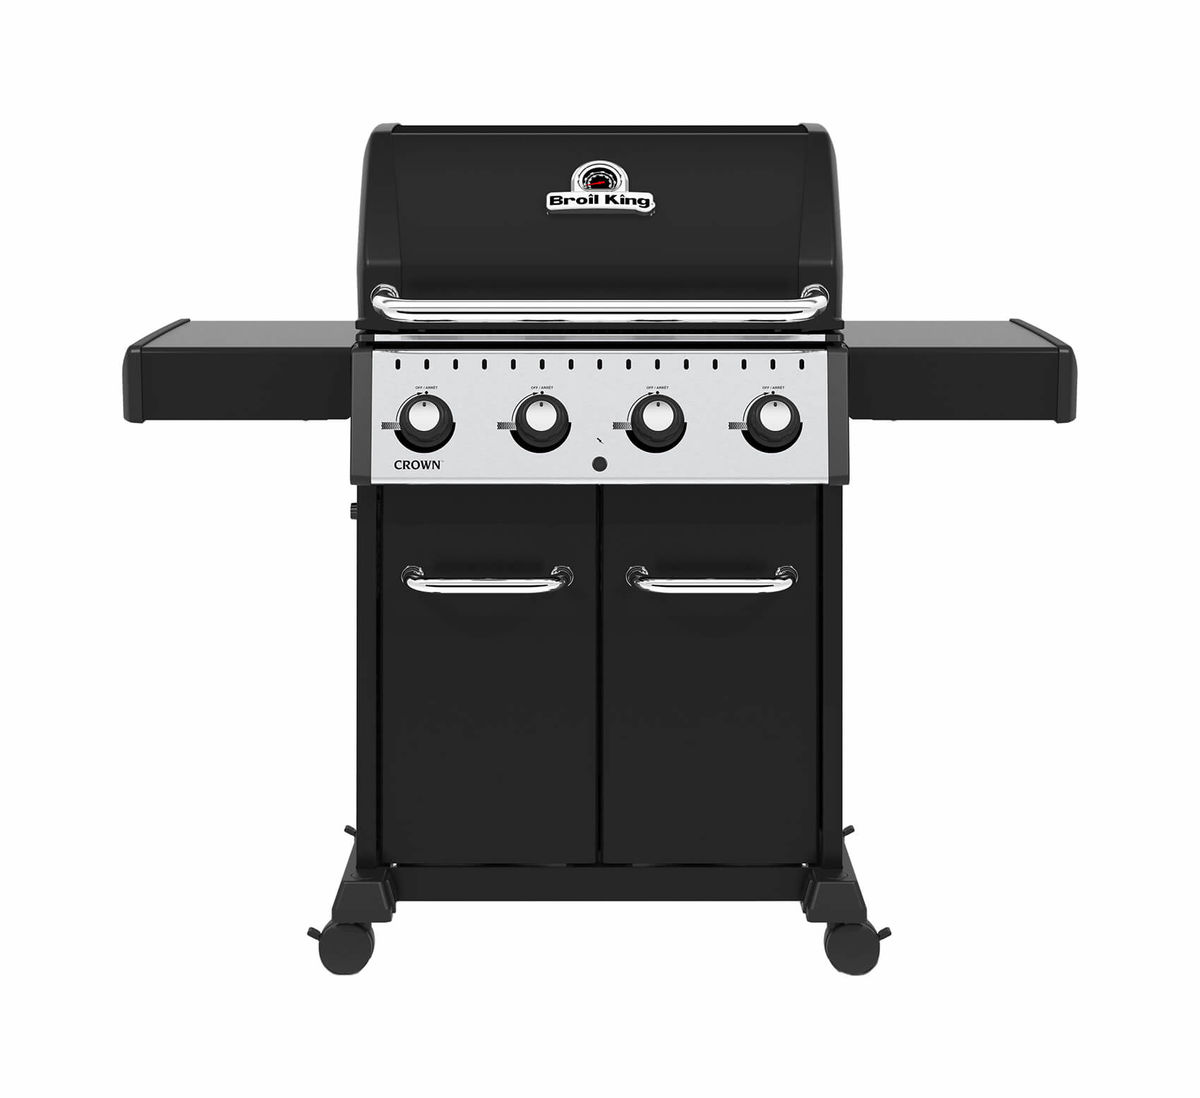 Image of Broil King Crown 420 Grill bei nettoshop.ch